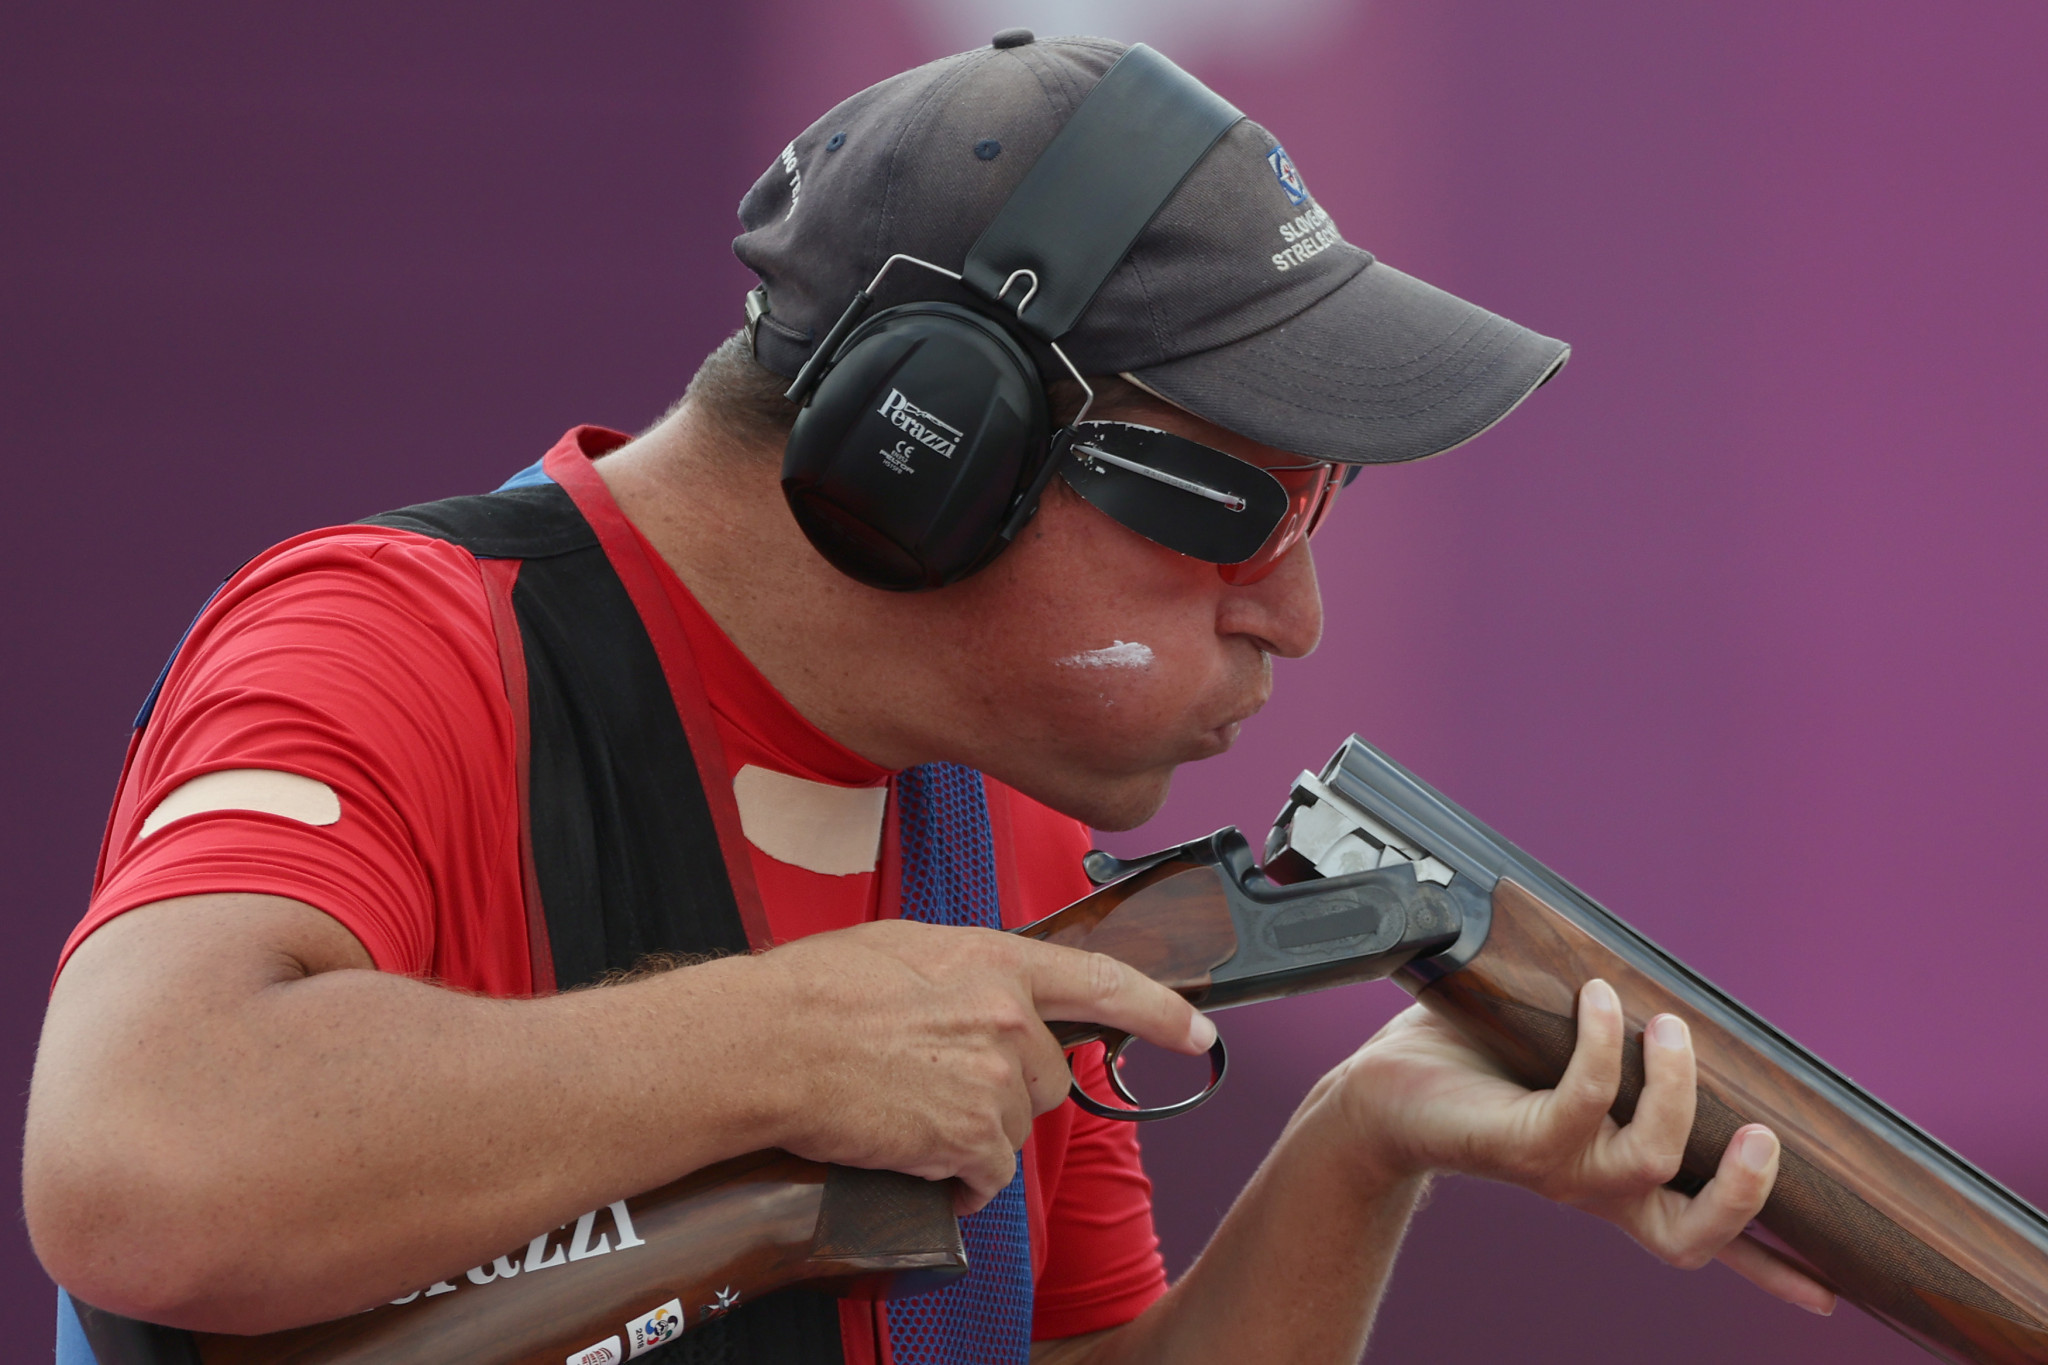 Hegarty and Varga win trap titles as ISSF President Lisin makes appearance at World Cup in Lonato